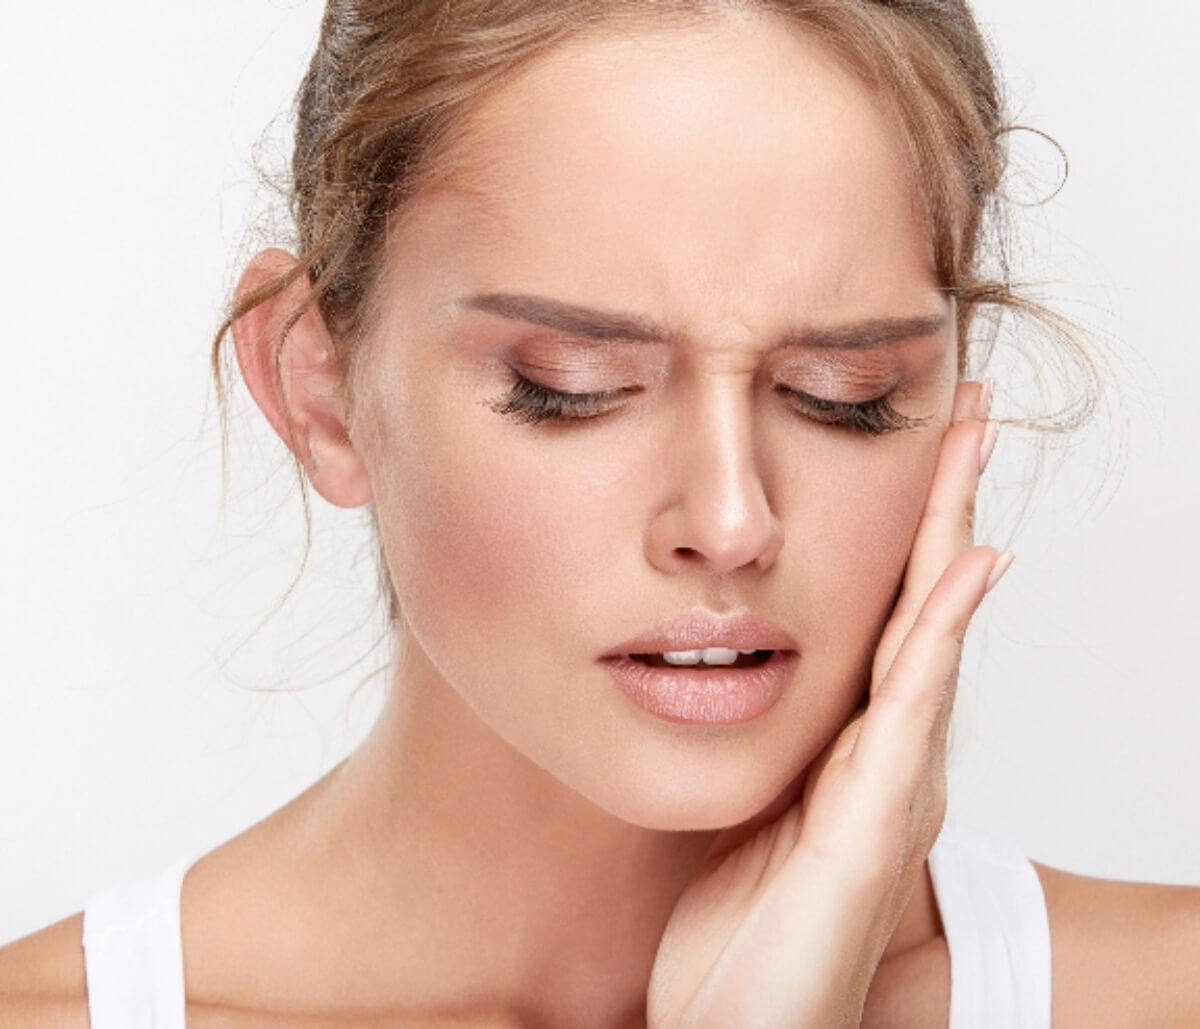 Wisdom Tooth Pain Relief in Fort Worth TX area